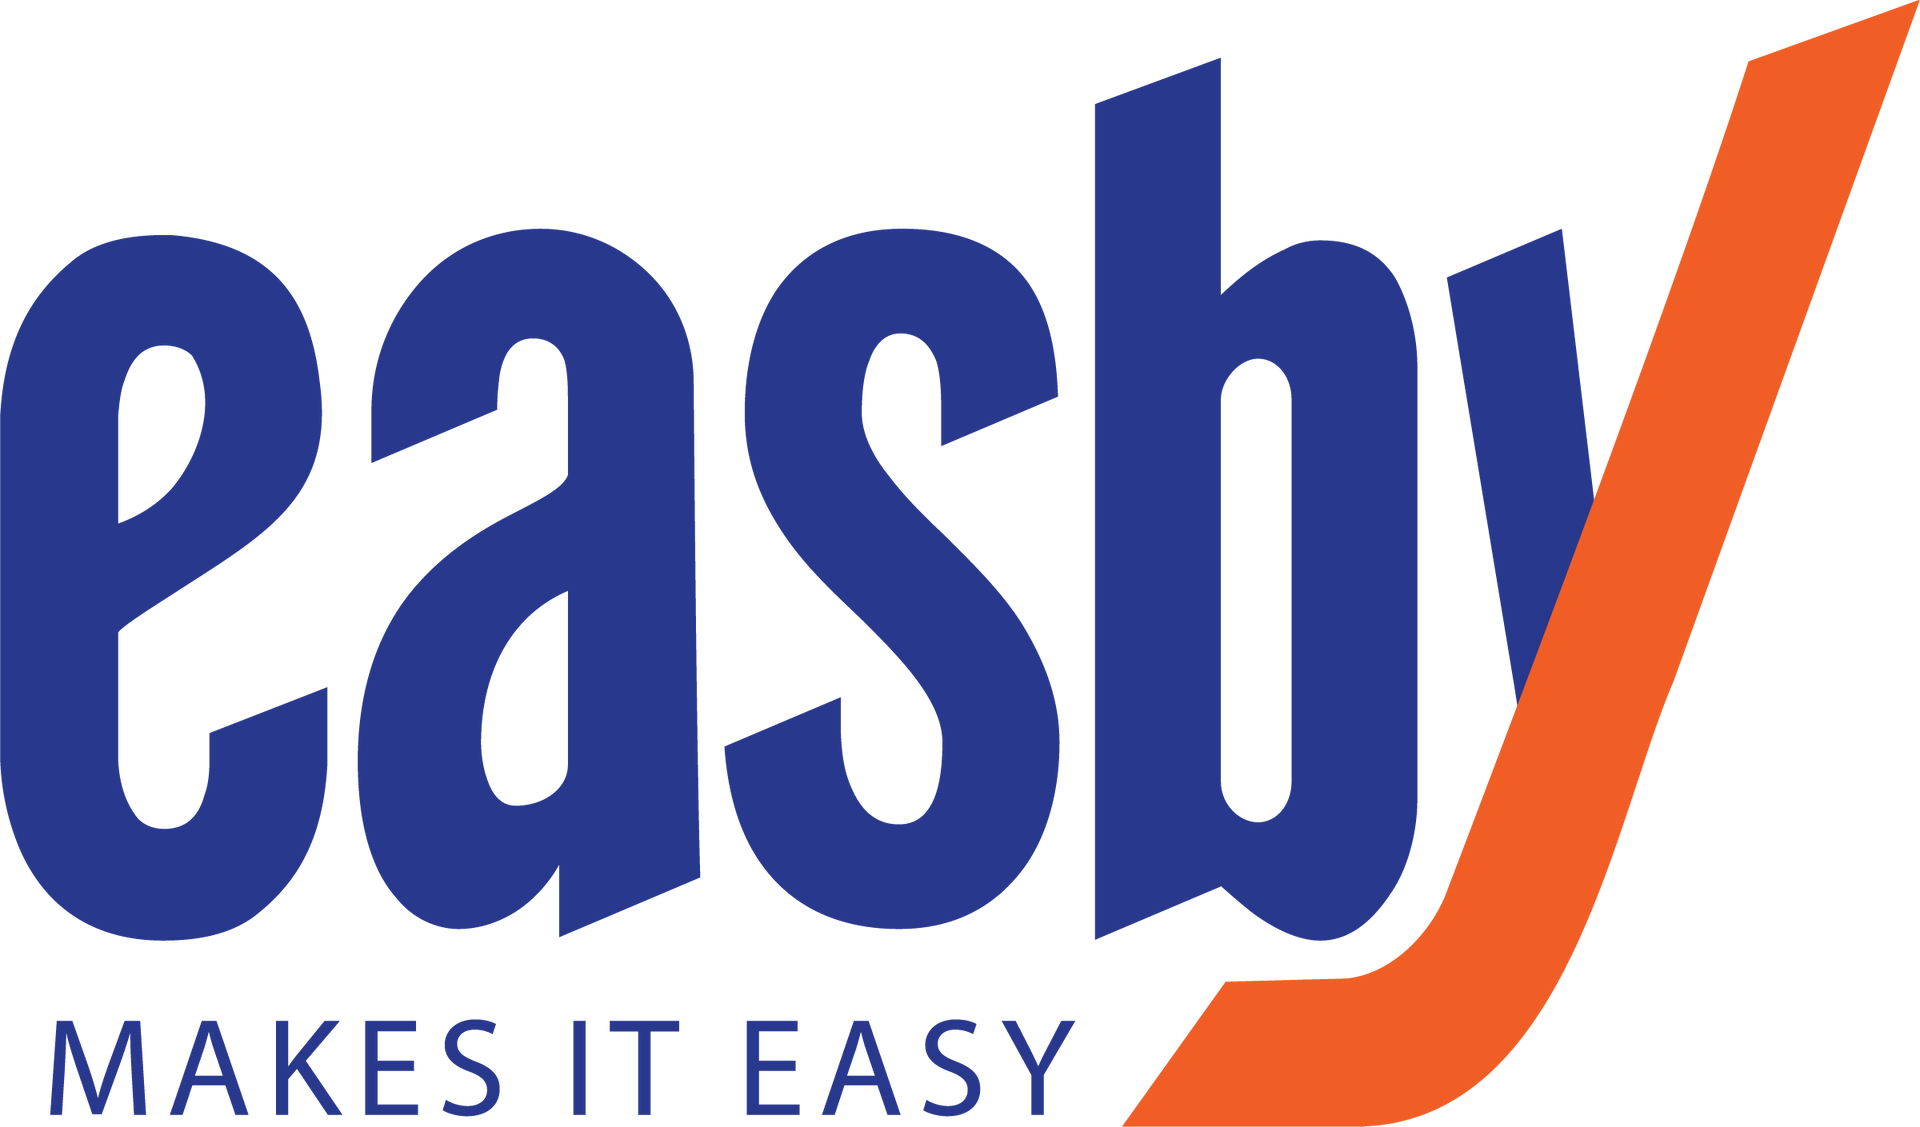 Easby Makes It Easy
